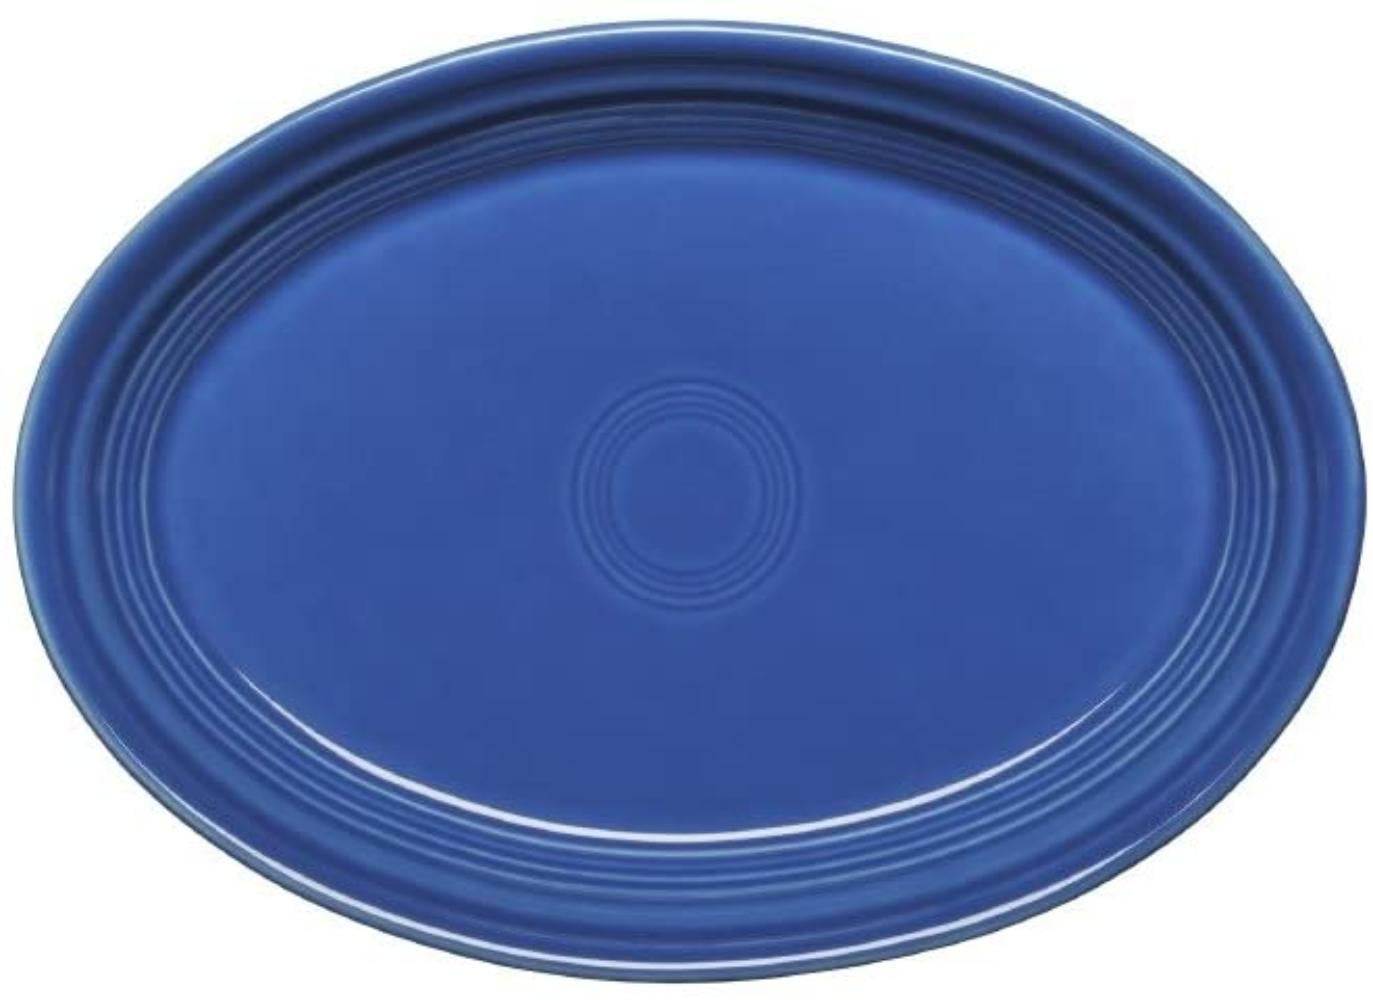 FIESTA 13-5/8" OVAL PLATTER-1ST QUALITY-CHOICE OF COLORS---PRICE REDUCED!! 